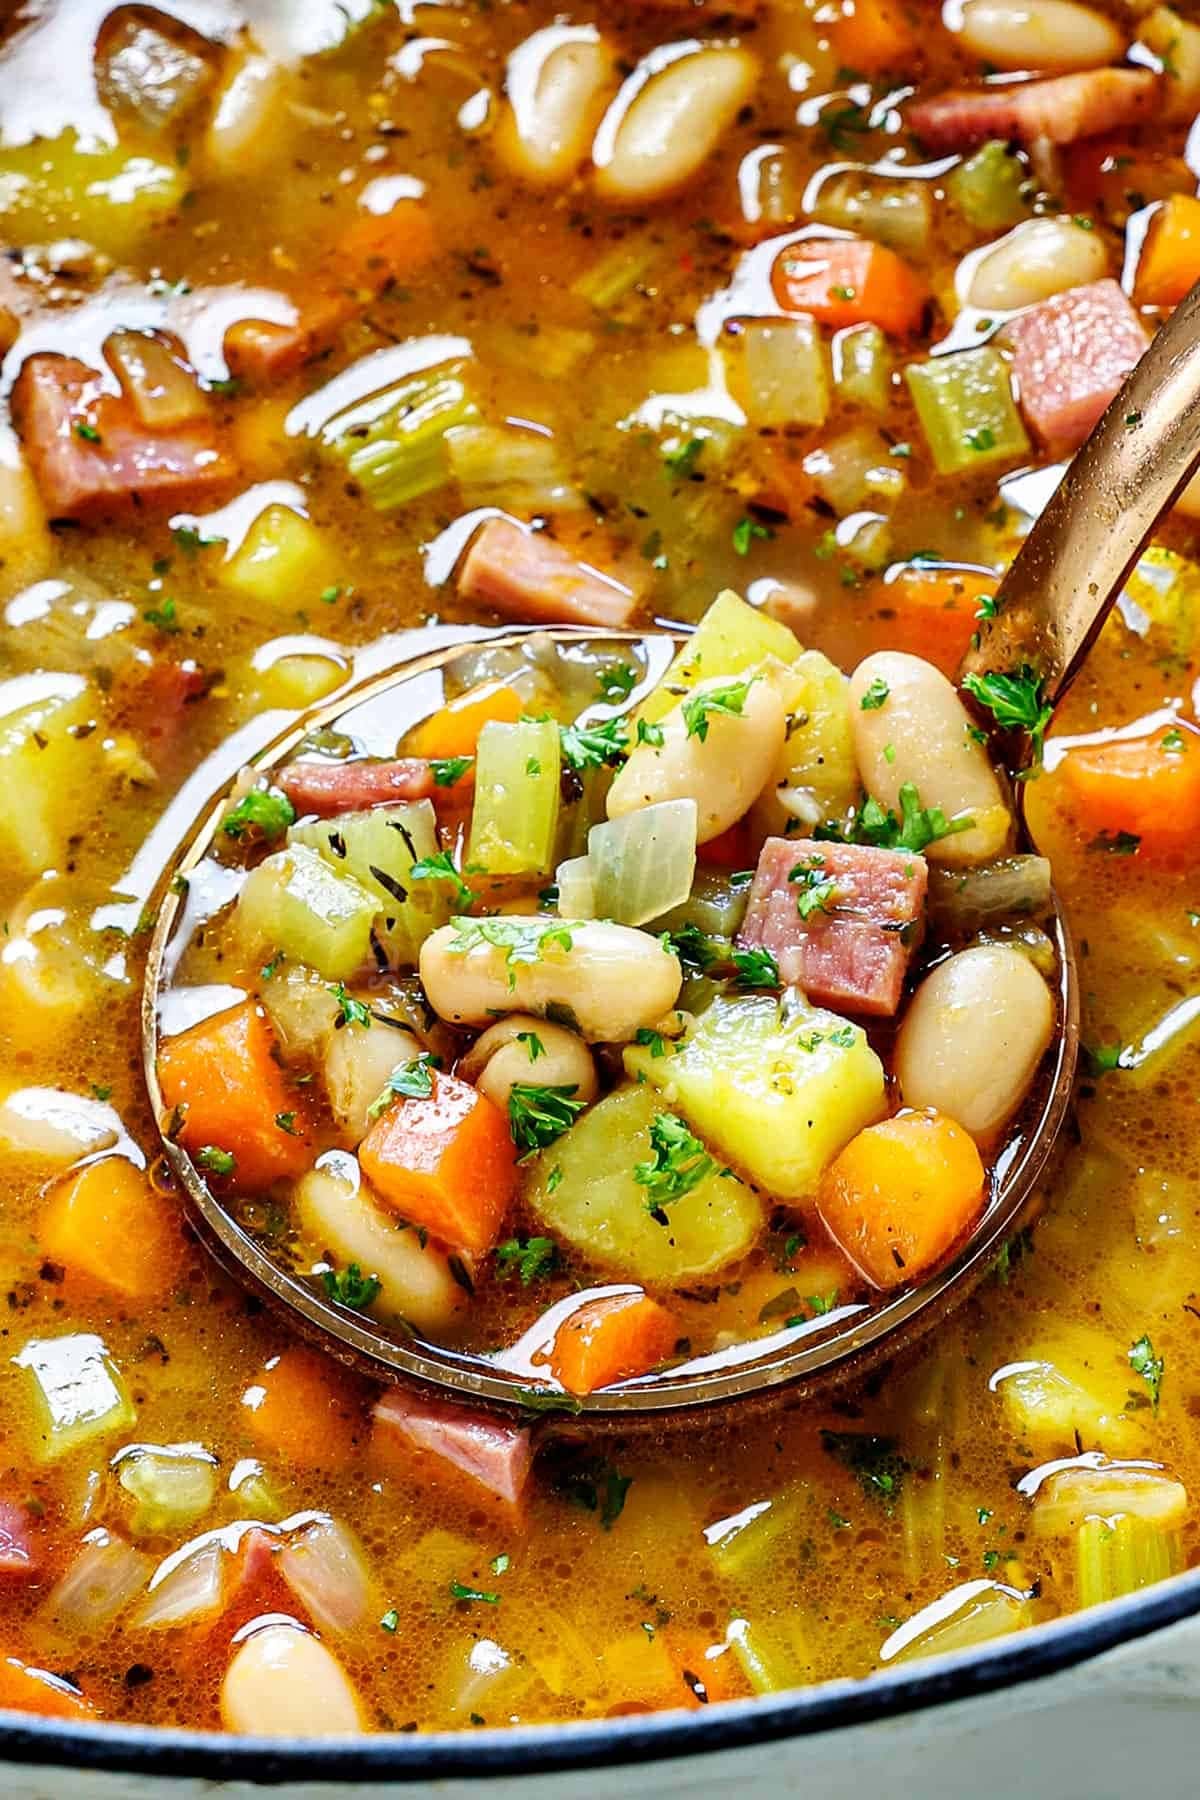 Warm ham and bean soup with carrots, beans, onions, herbs, and potatoes- close up view of a bowl with soup in the spoon